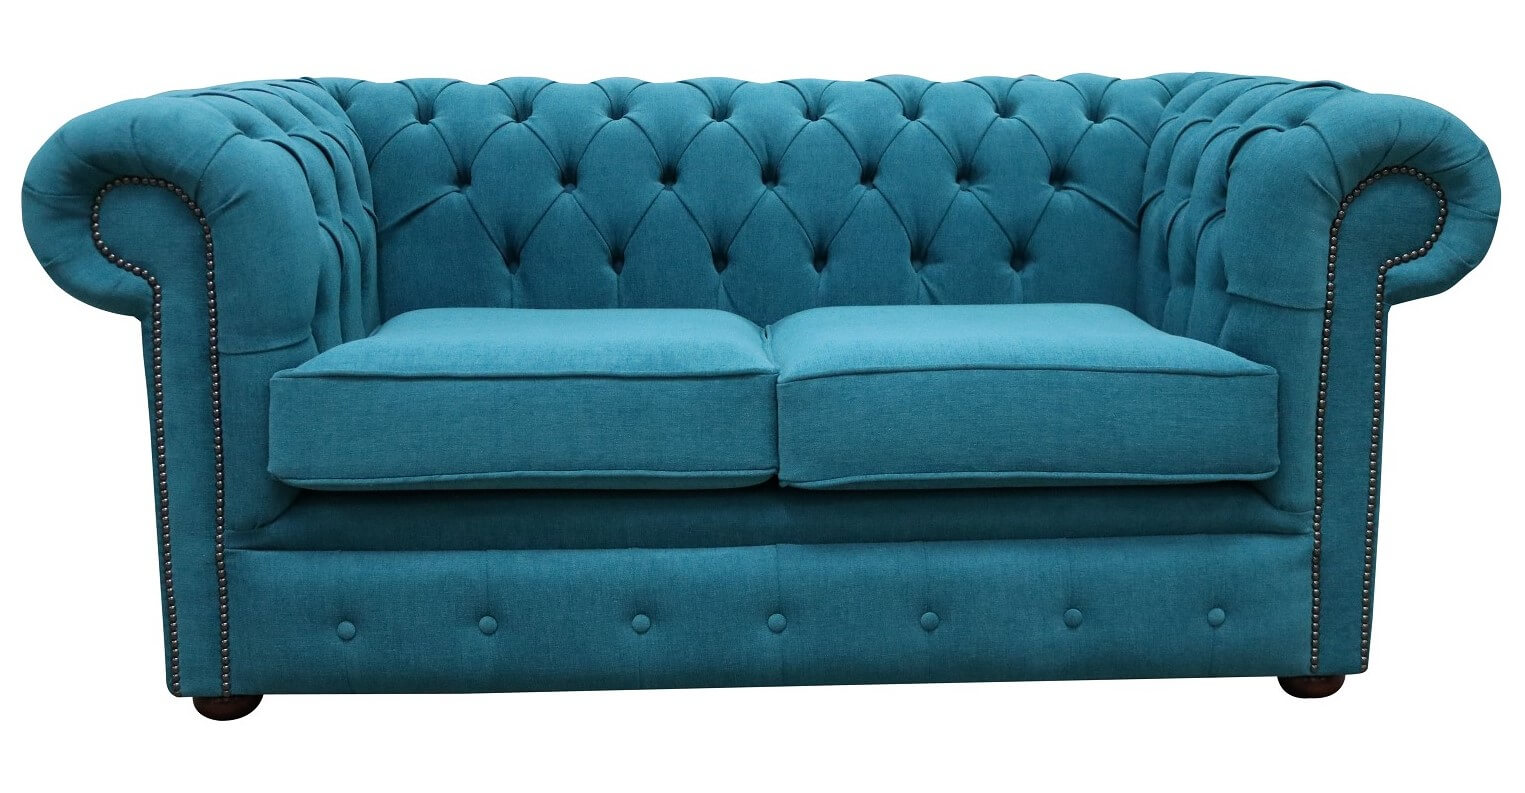 Elevating Elegance Incorporating a Chesterfield Sofa into Your Living Room Décor  %Post Title